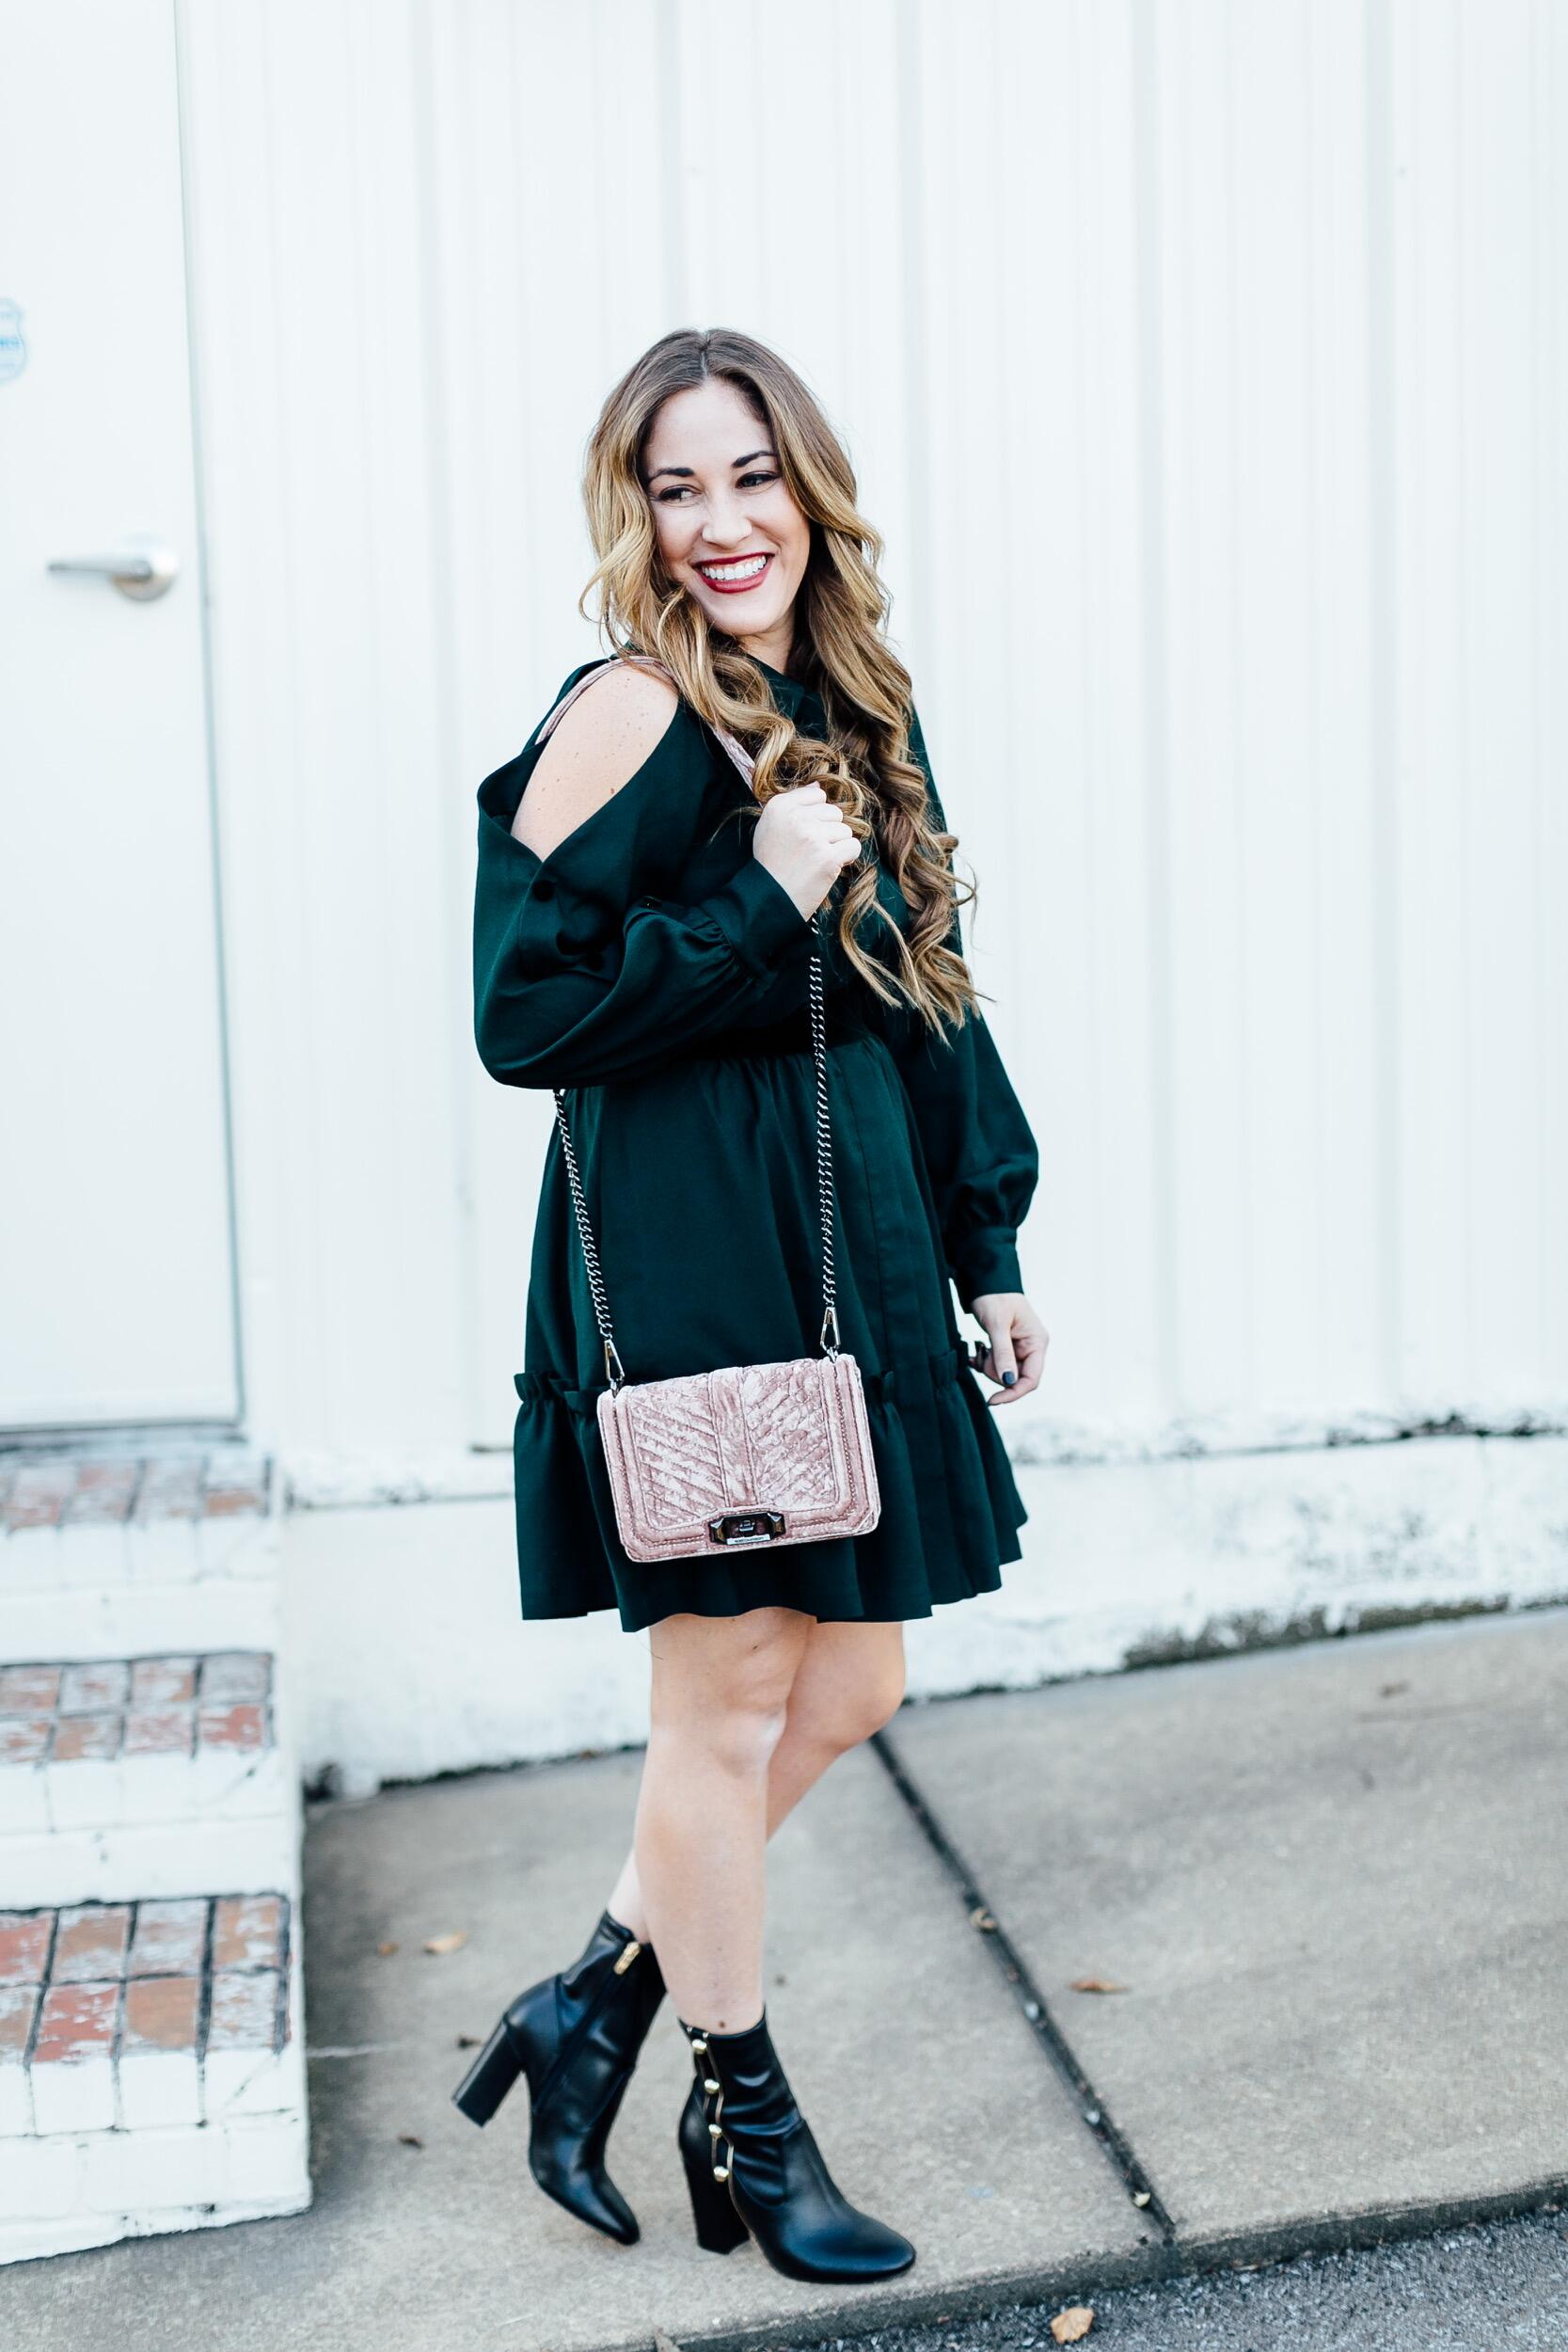 Thanksgiving Outfit Blog Hop by East Memphis fashion blogger Walking in Memphis in High Heels